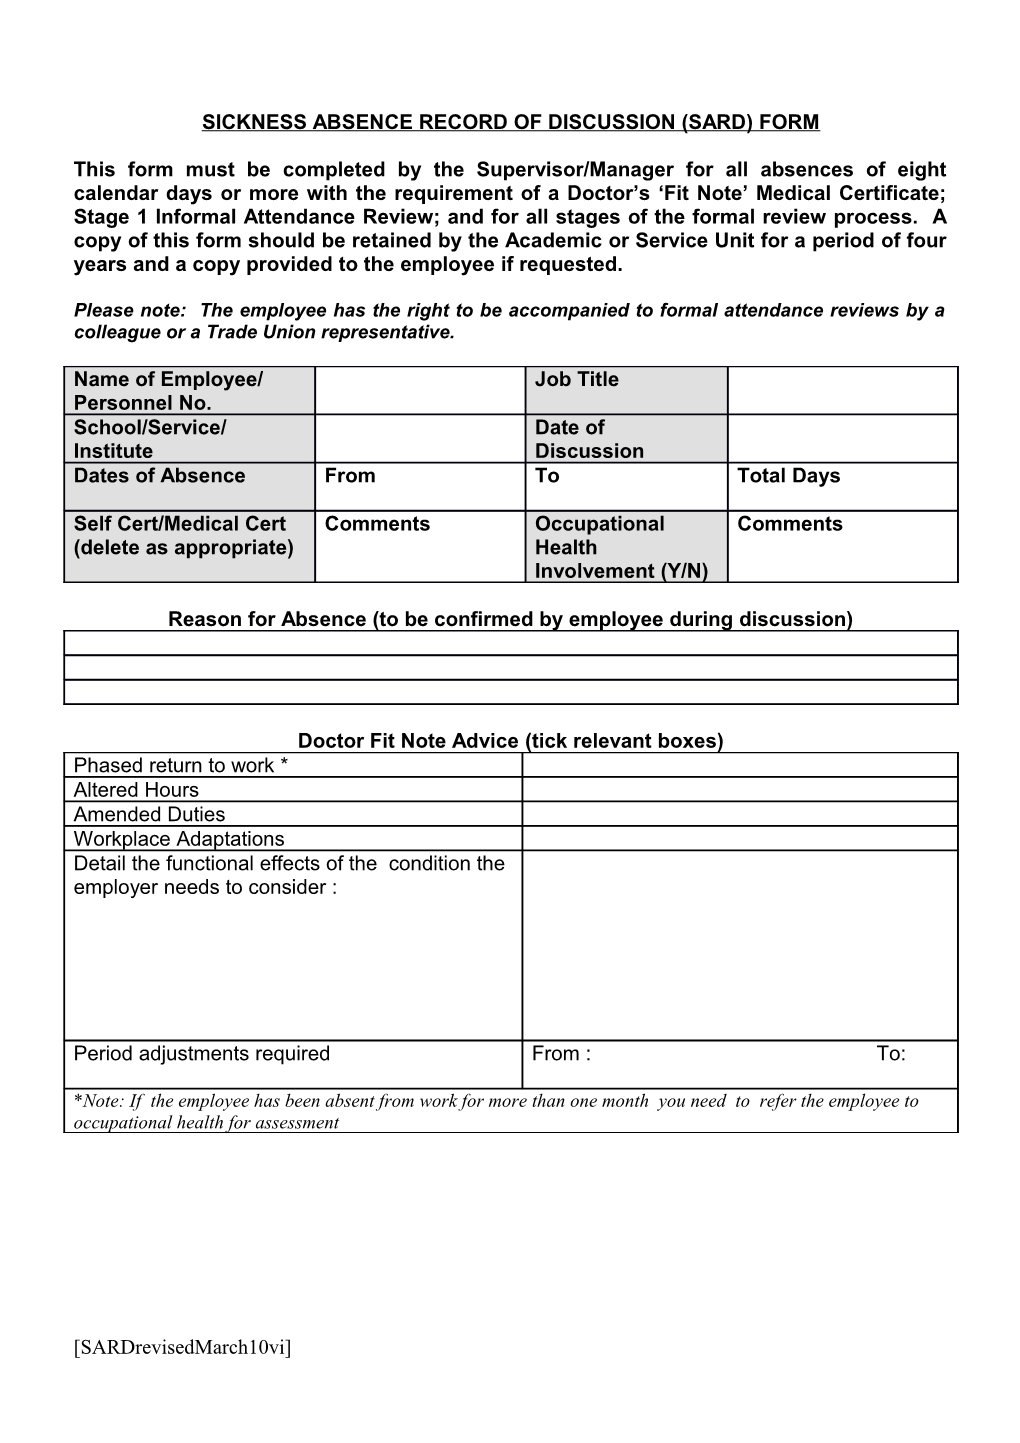 Sickness Absence Record of Discussion (Sard) Form